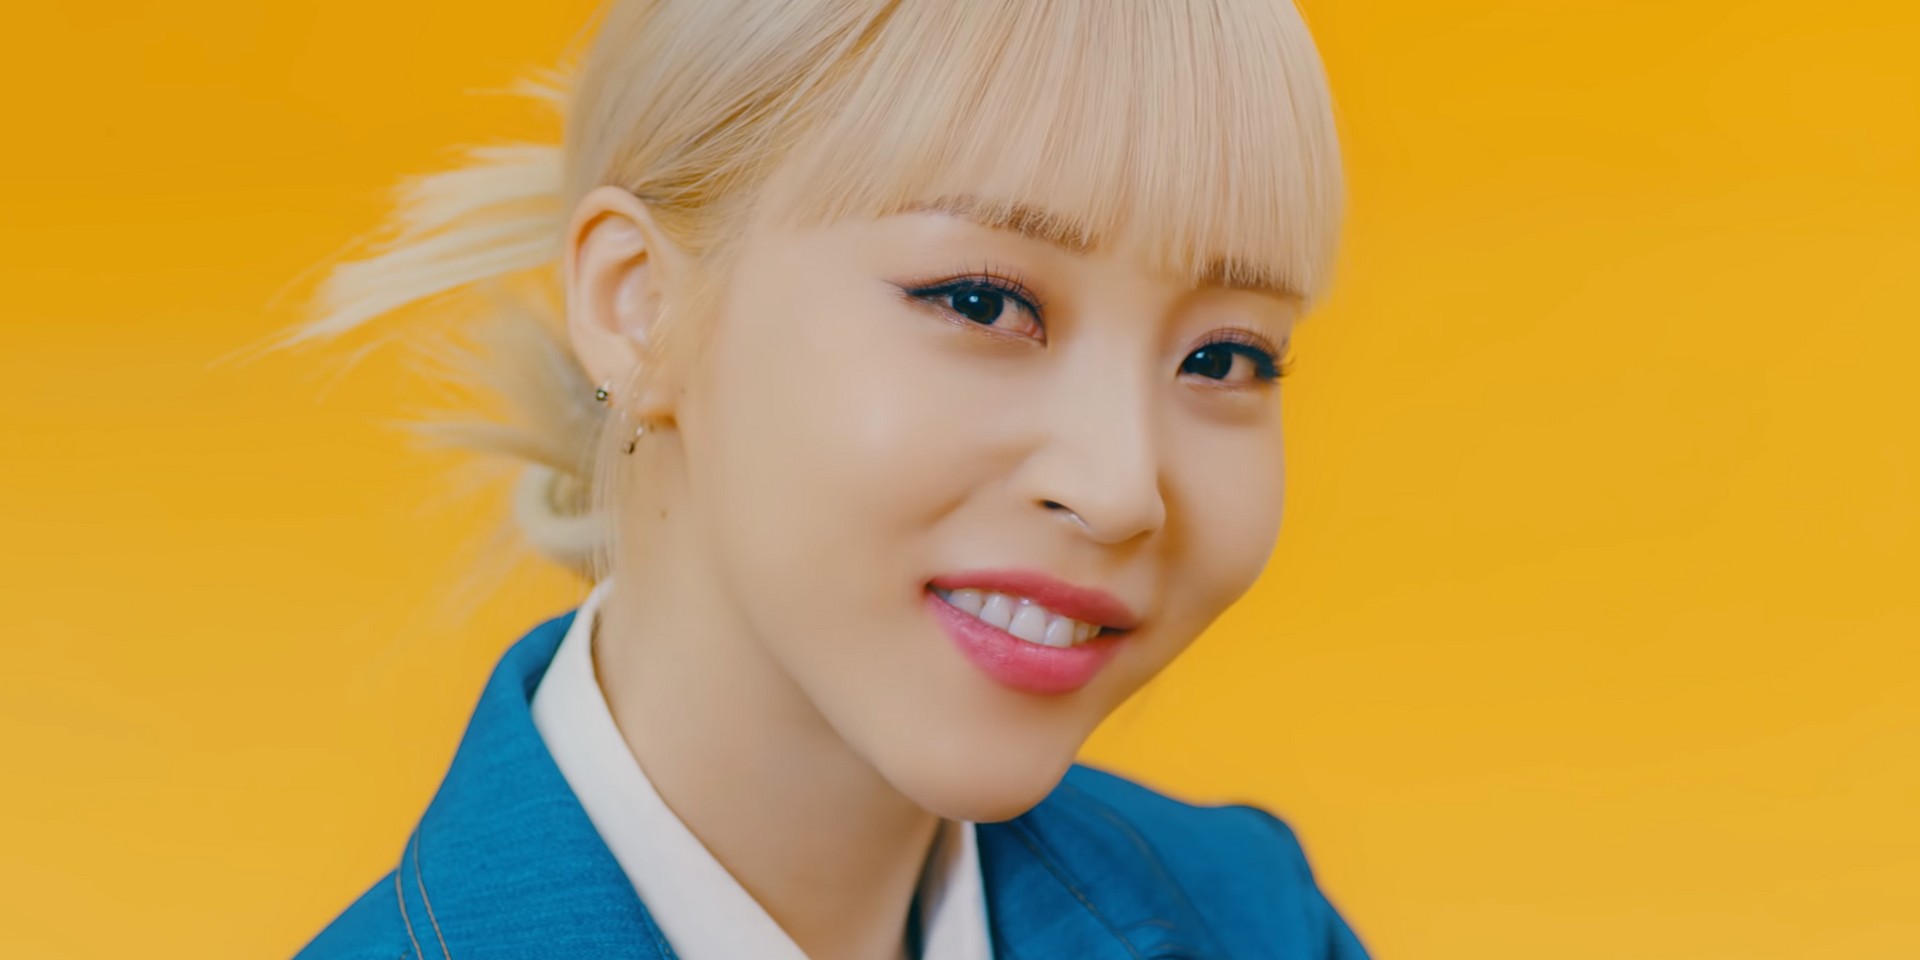 MAMAMOO's Moonbyul to release new single album, C.I.T.T (Cheese in the Trap), this April